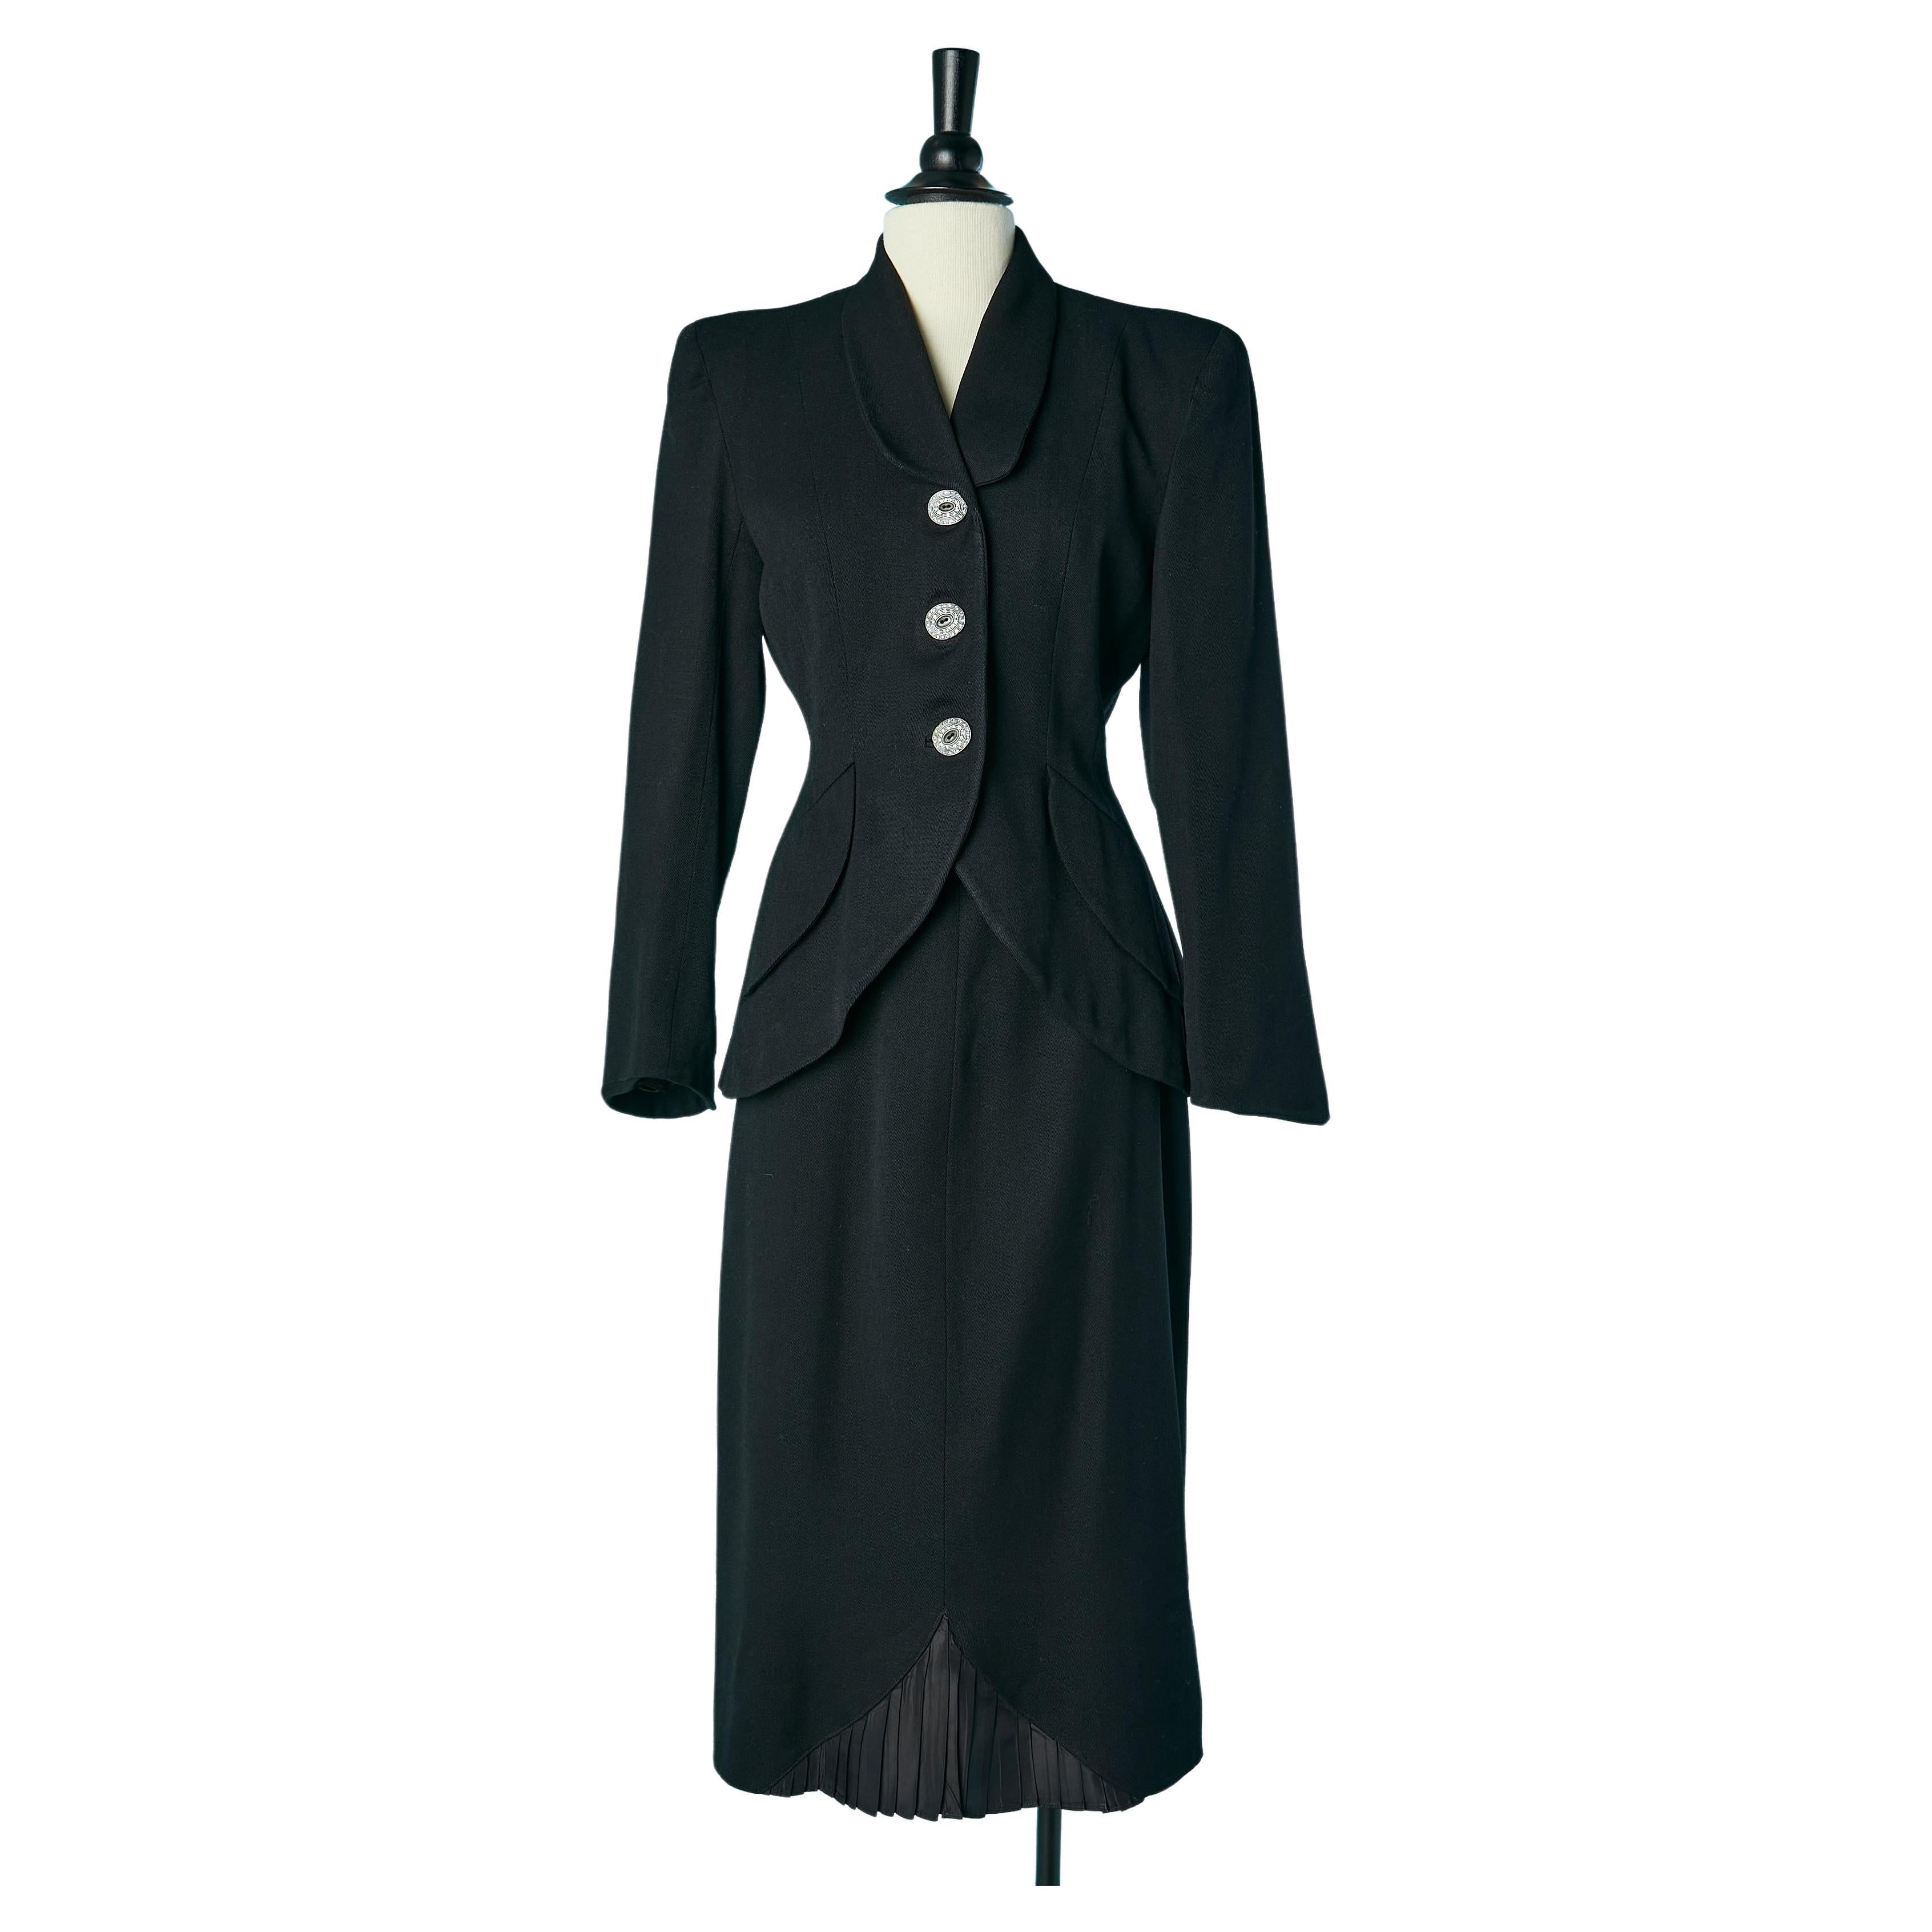 Black wool skirt-suit with jewlerry buttons and cut-work Lilli Ann  For Sale